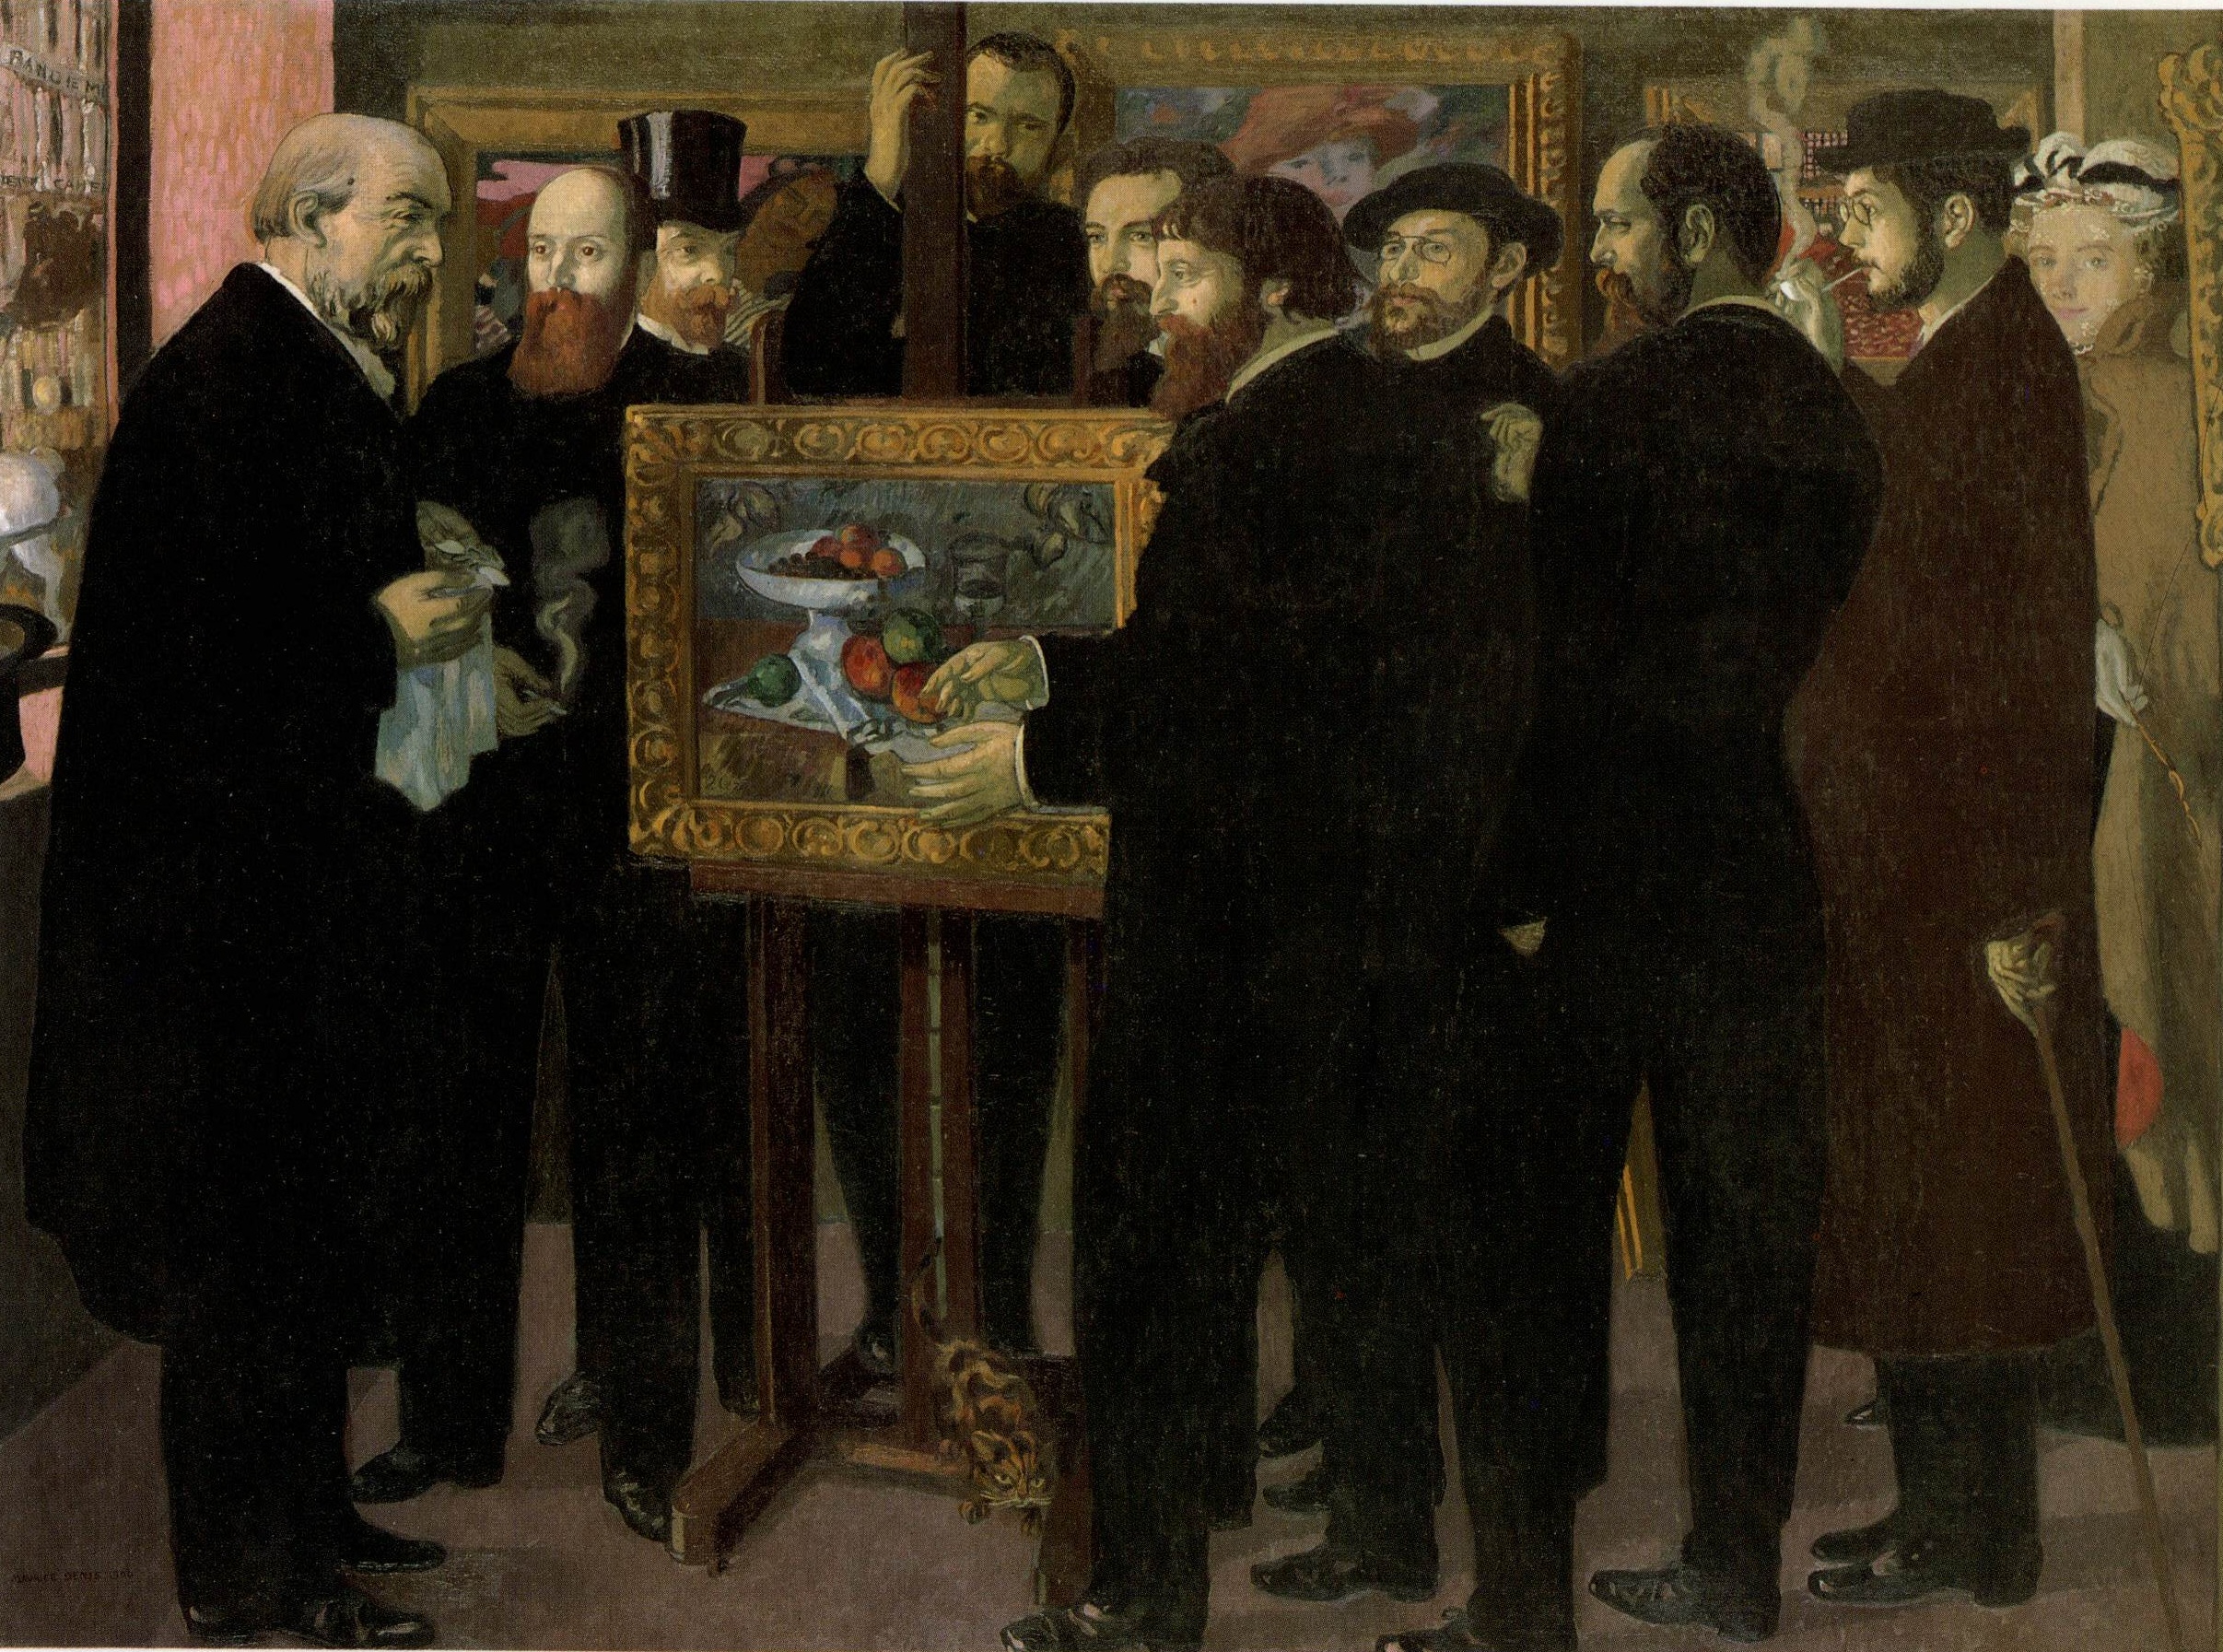 Hommage an Cézanne by Maurice Denis - 1900 - 180 x 240 cm Musée d'Orsay